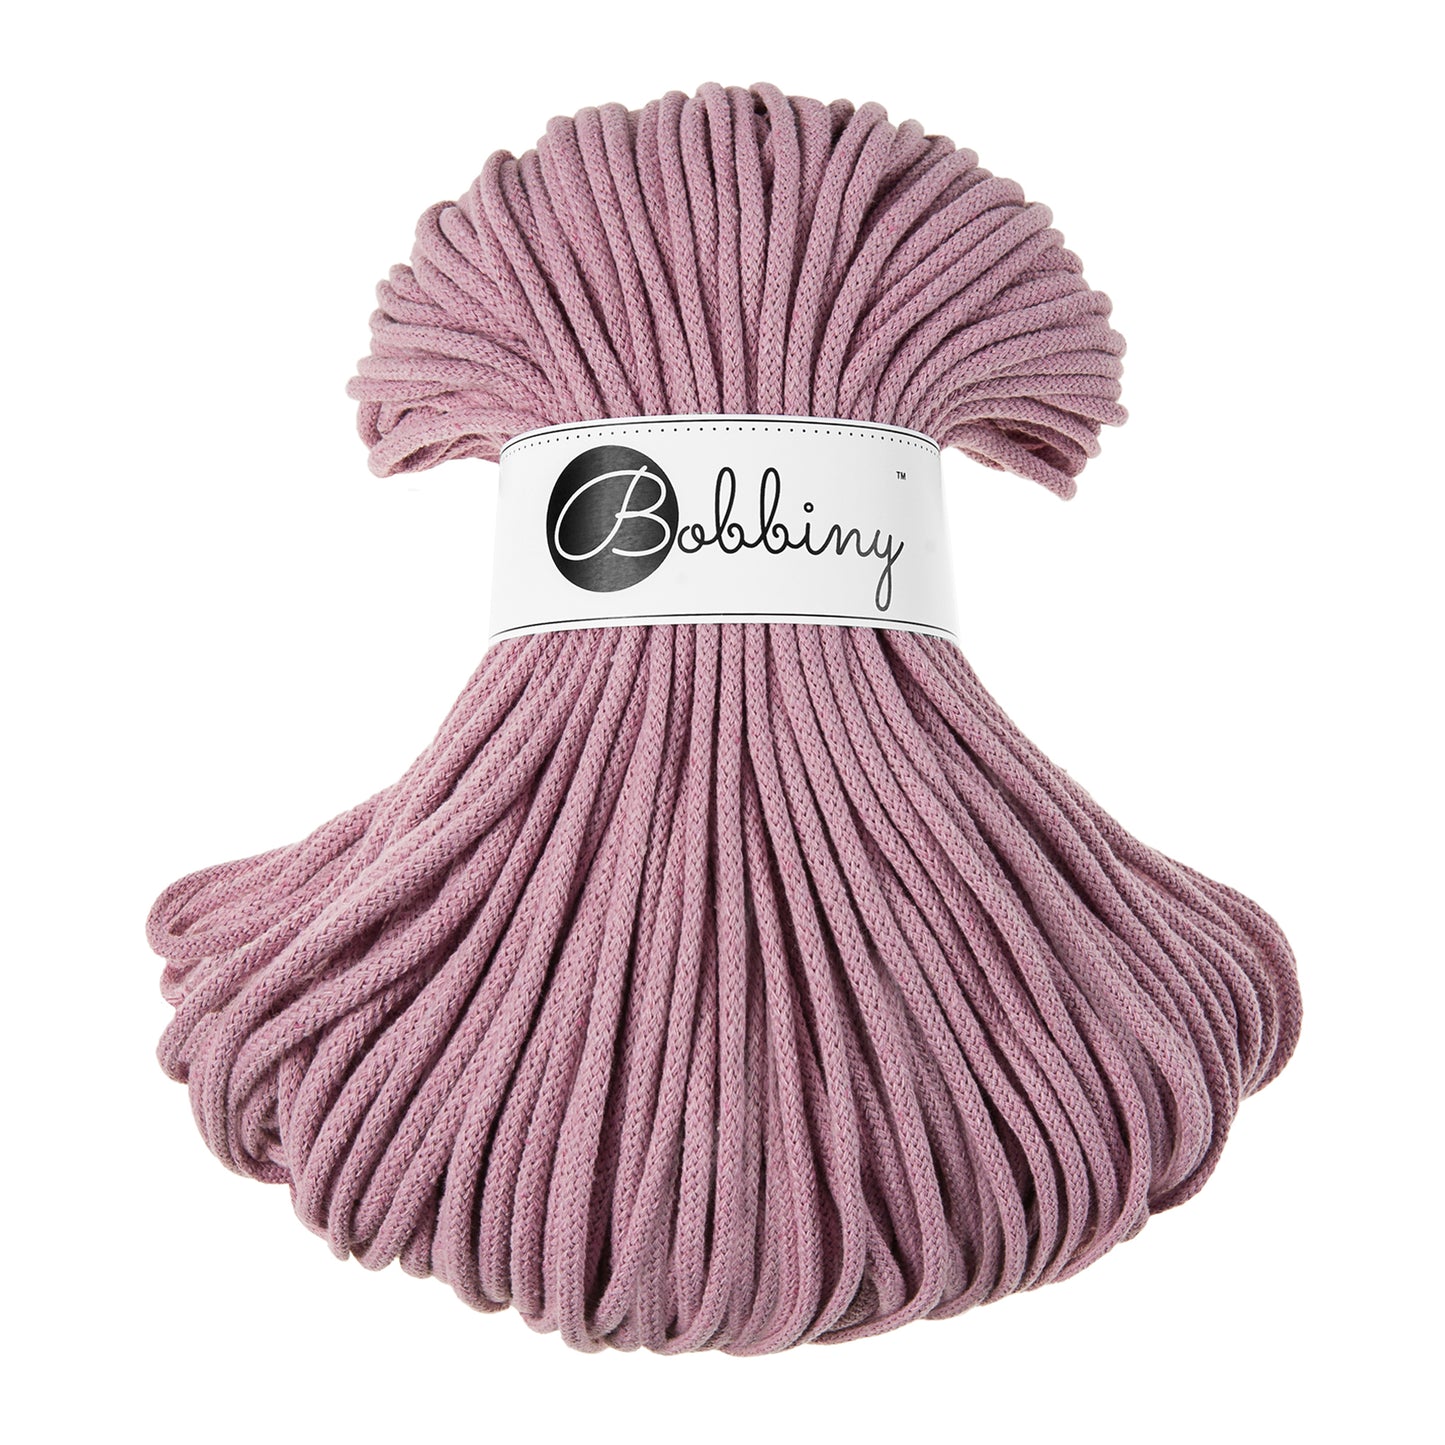 DUSTY PINK Braided cord 5mm